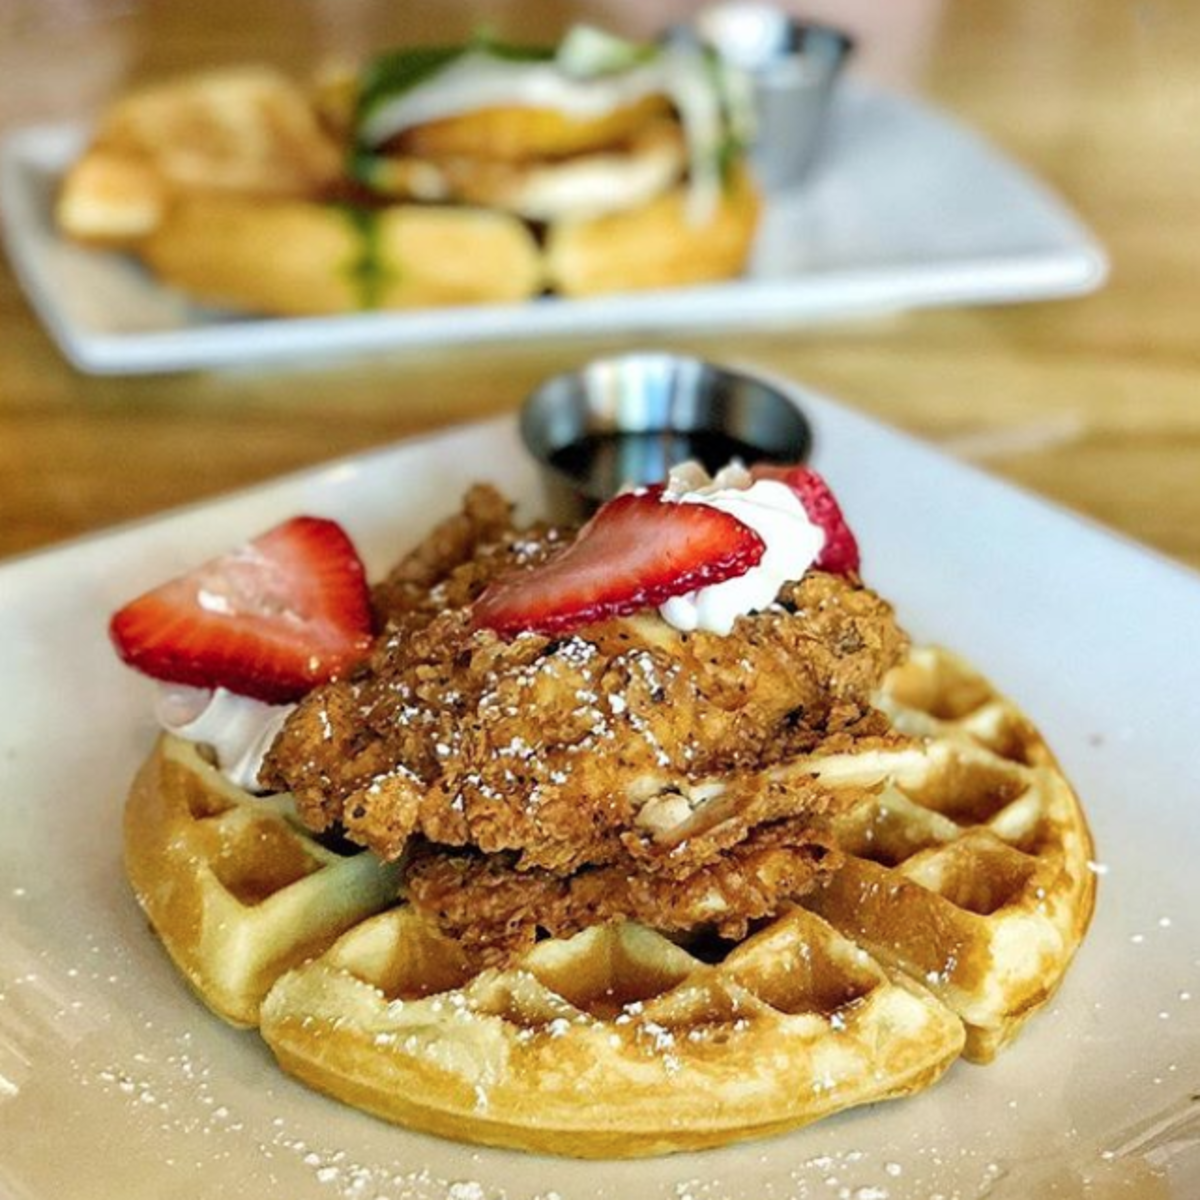 Chicken and waffles topped off with strawberries at Jupiter Pizza & Waffle Co.